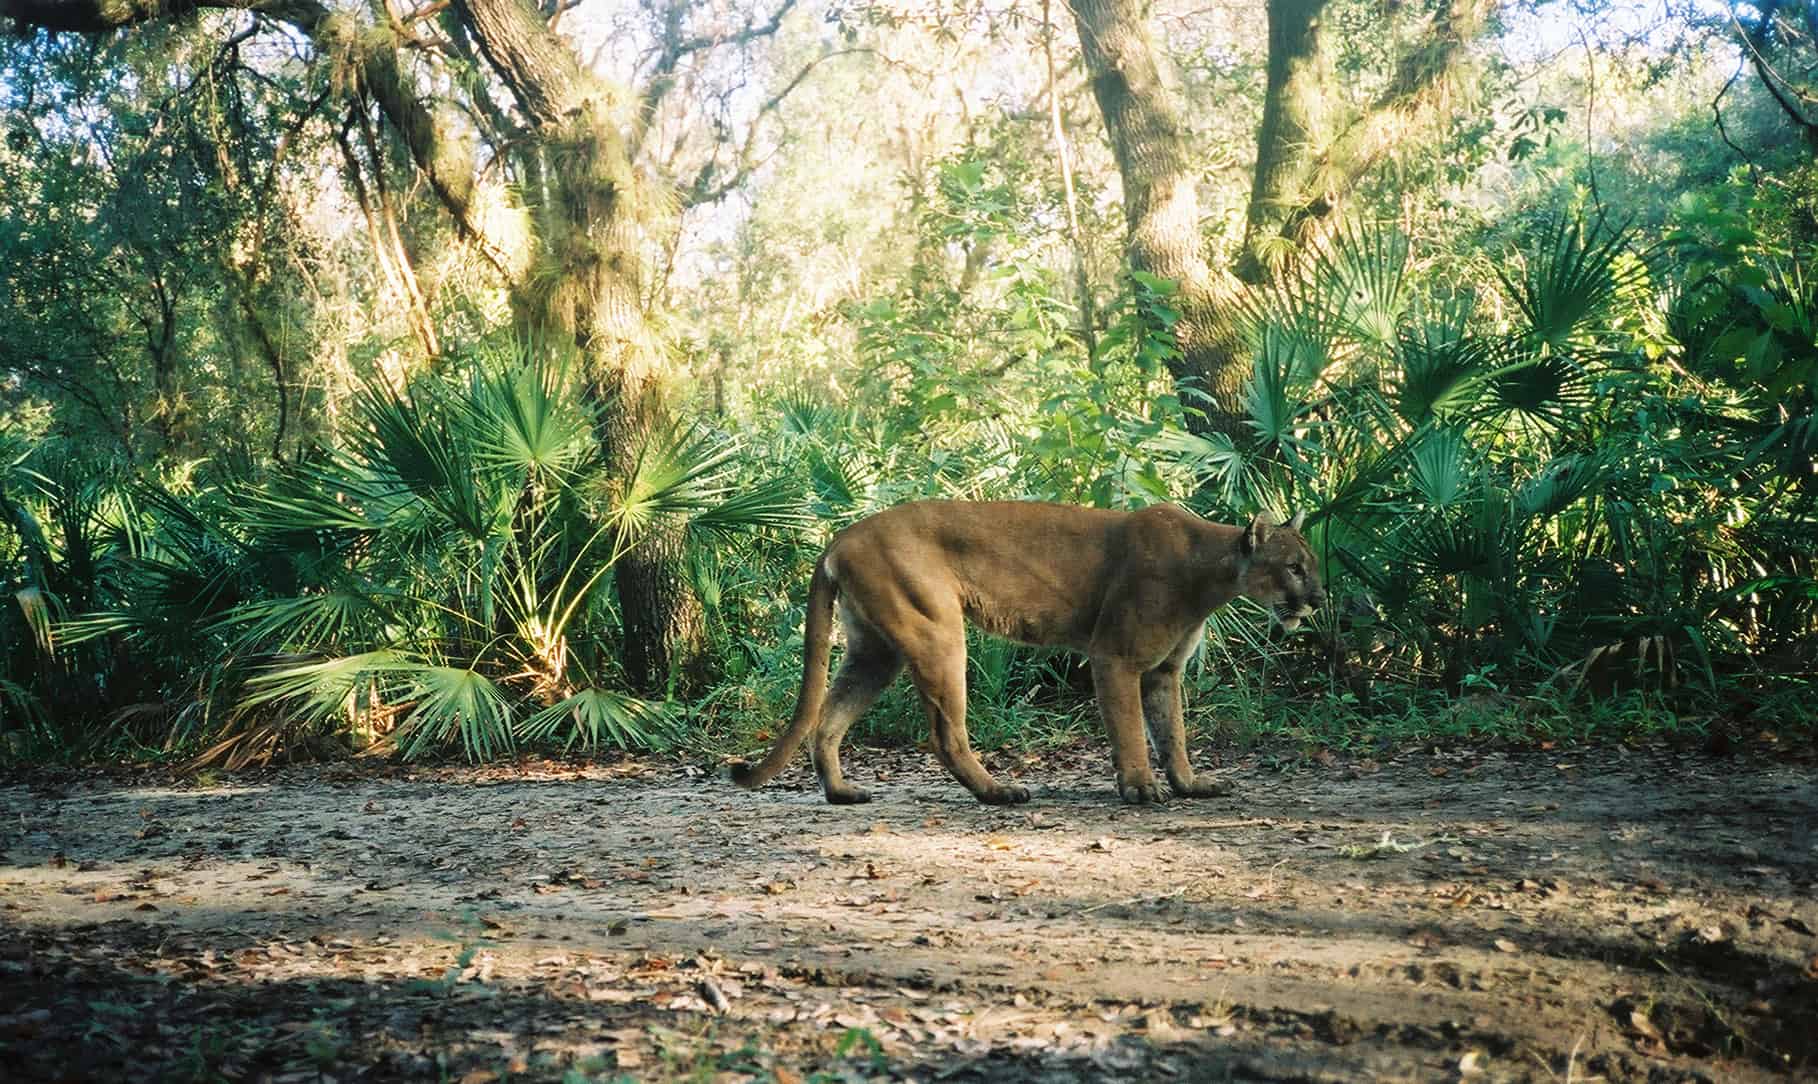 A Florida panther appears on camera at the Florida Panther National Wildlife Refuge. Credit: David Shindle/ Florida Fish and Wildlife Conservation Commission